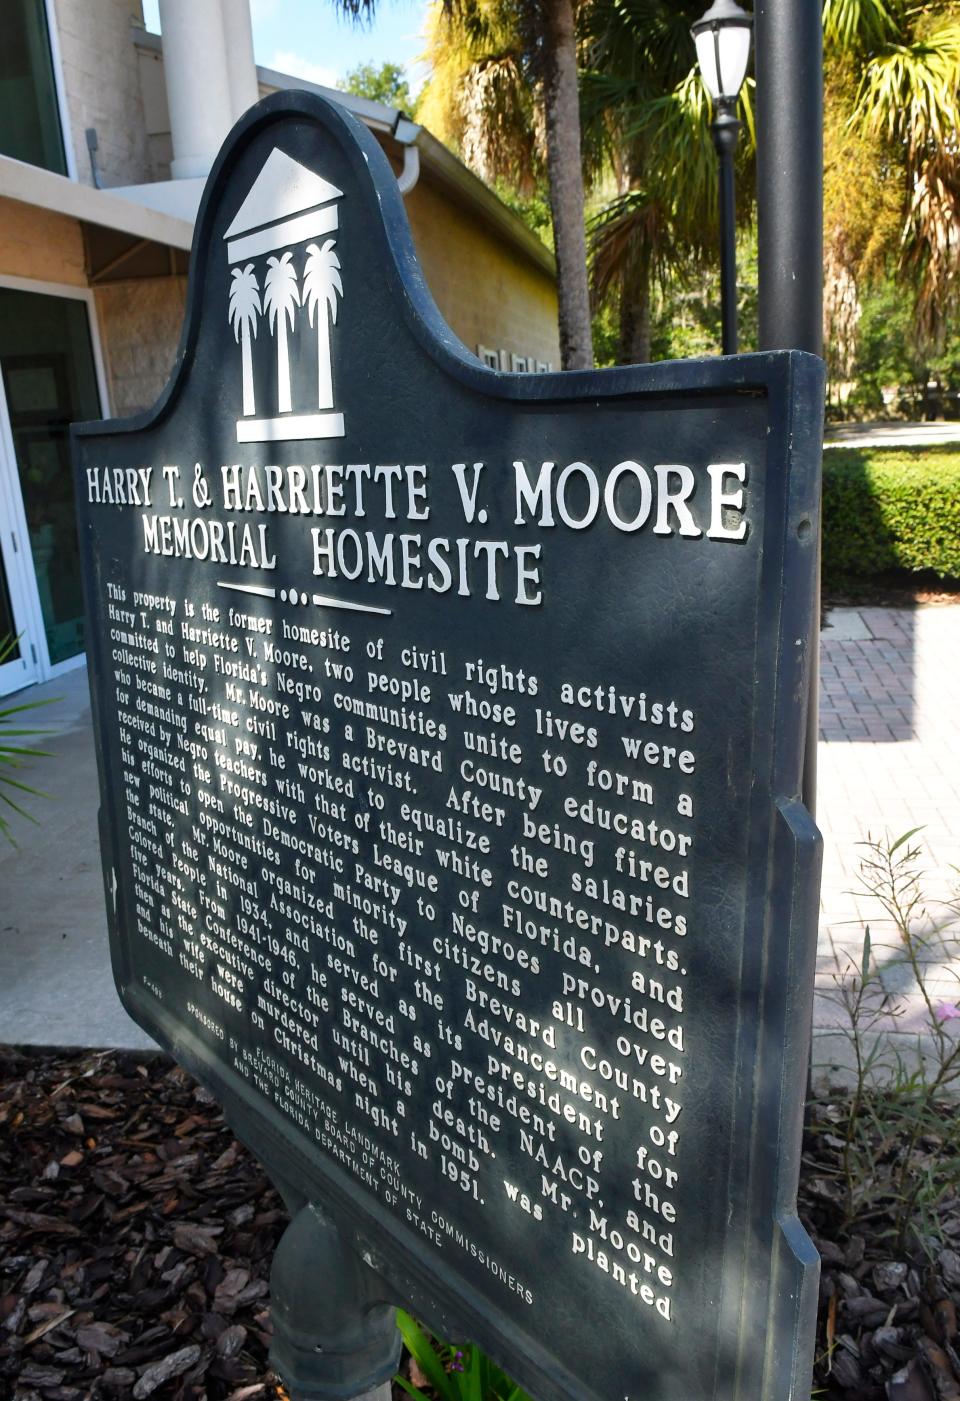 A historic marker details information about Harry T. and Harette V. Moore at the memorial park and museum where the couple lived in Mims.